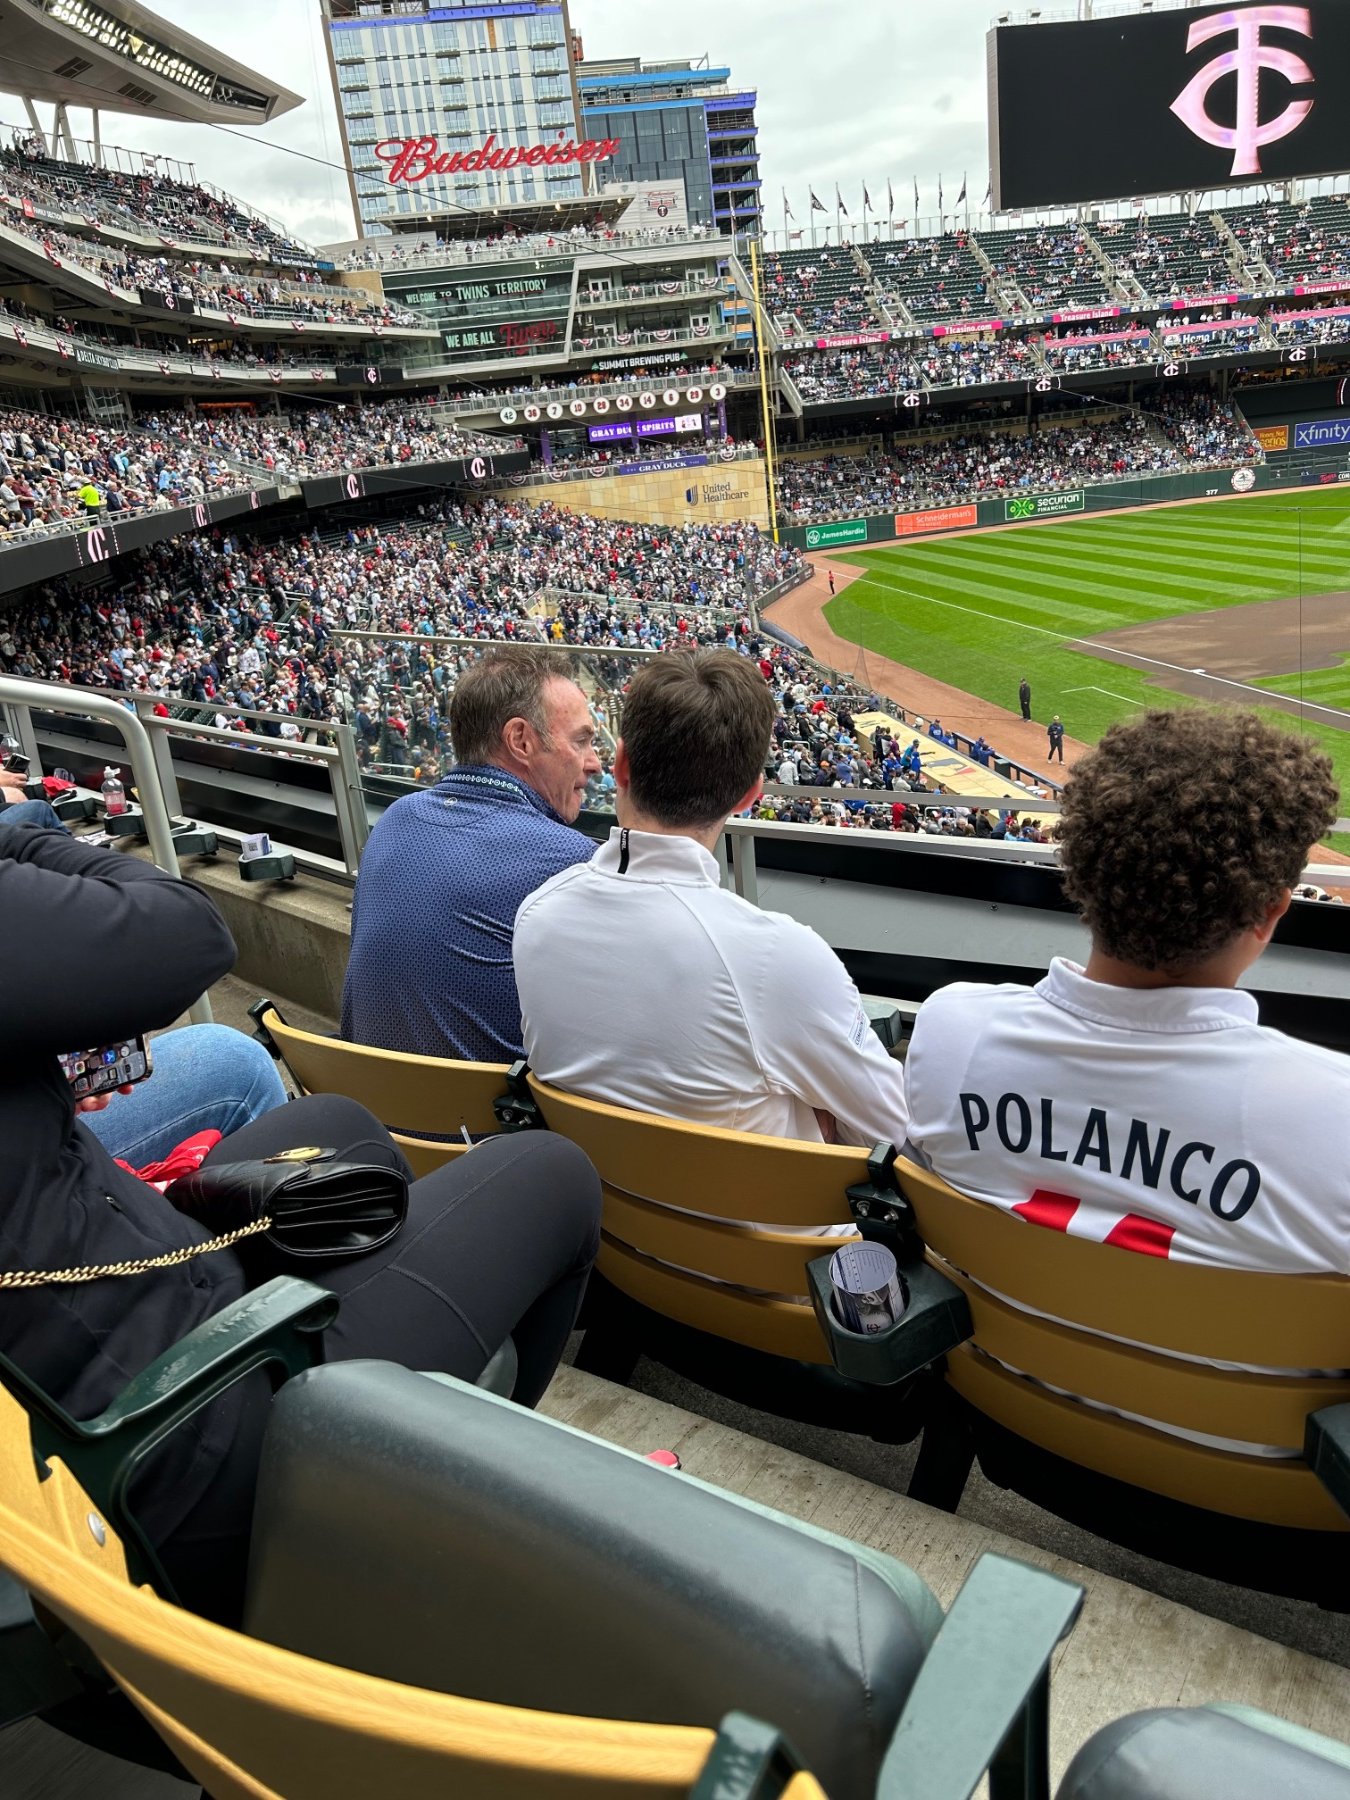 Breakdown Of The Target Field Seating Chart